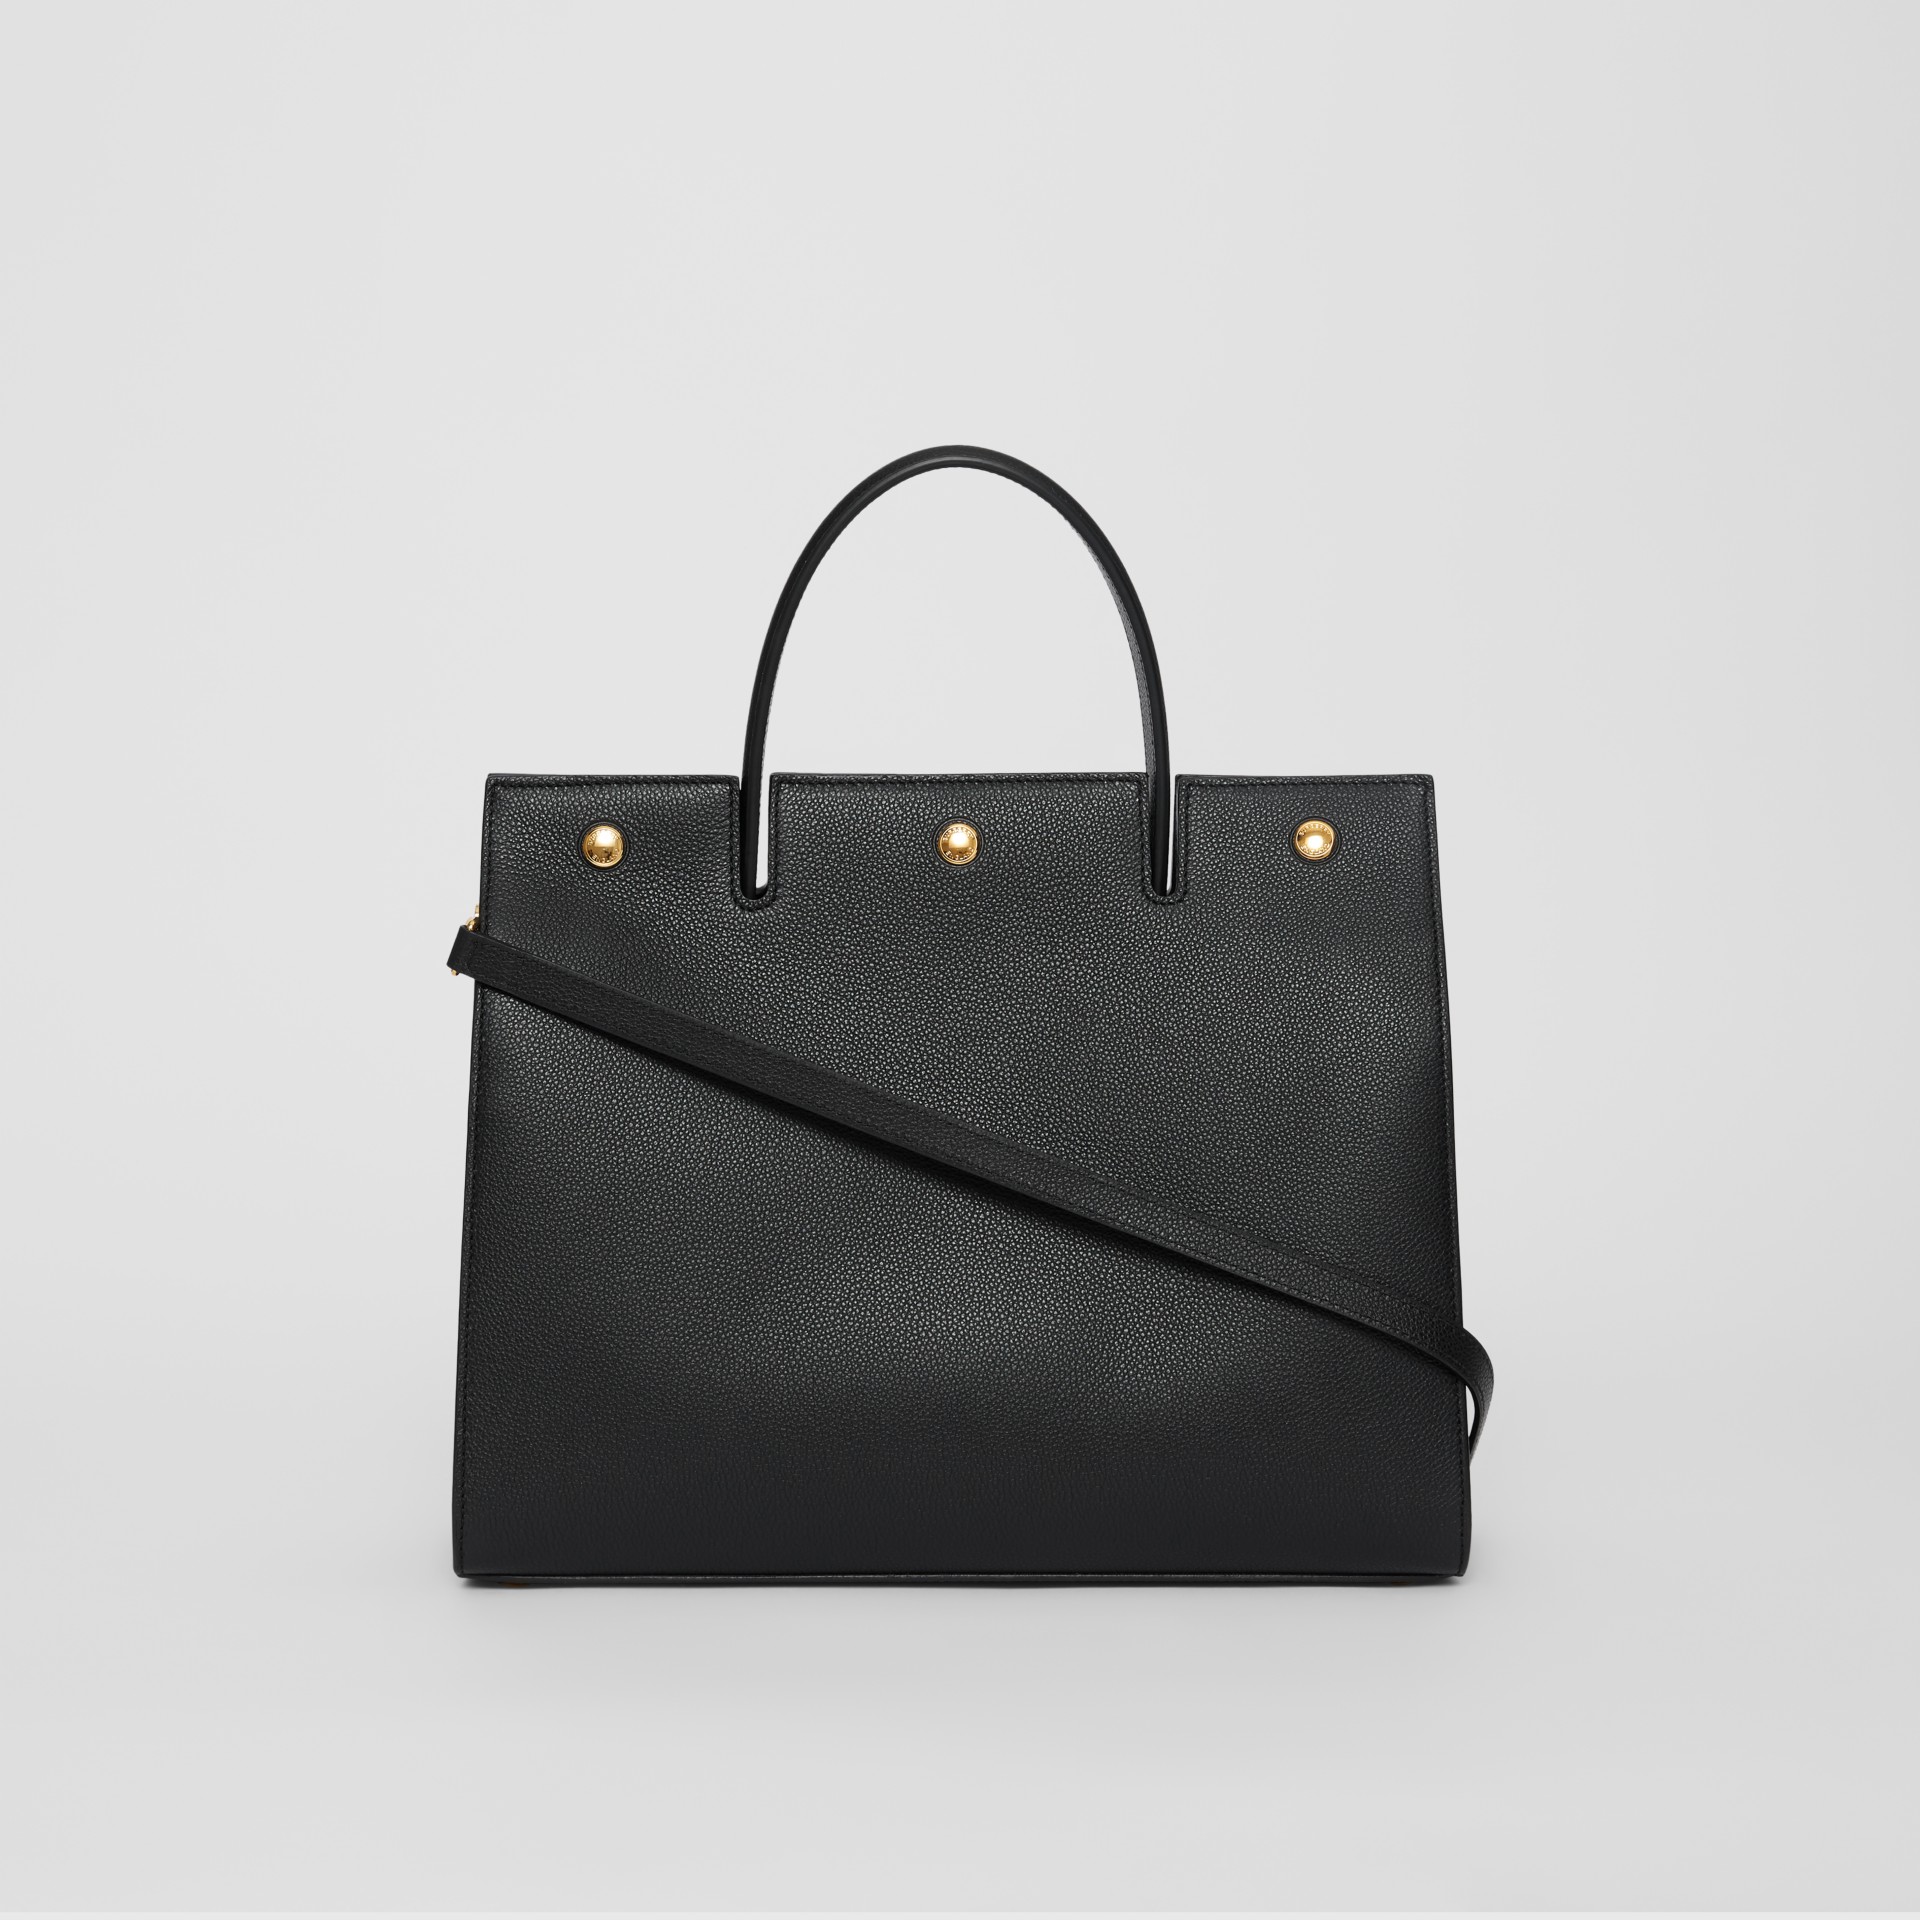 Medium Leather Title Bag in Black - Women | Burberry United States